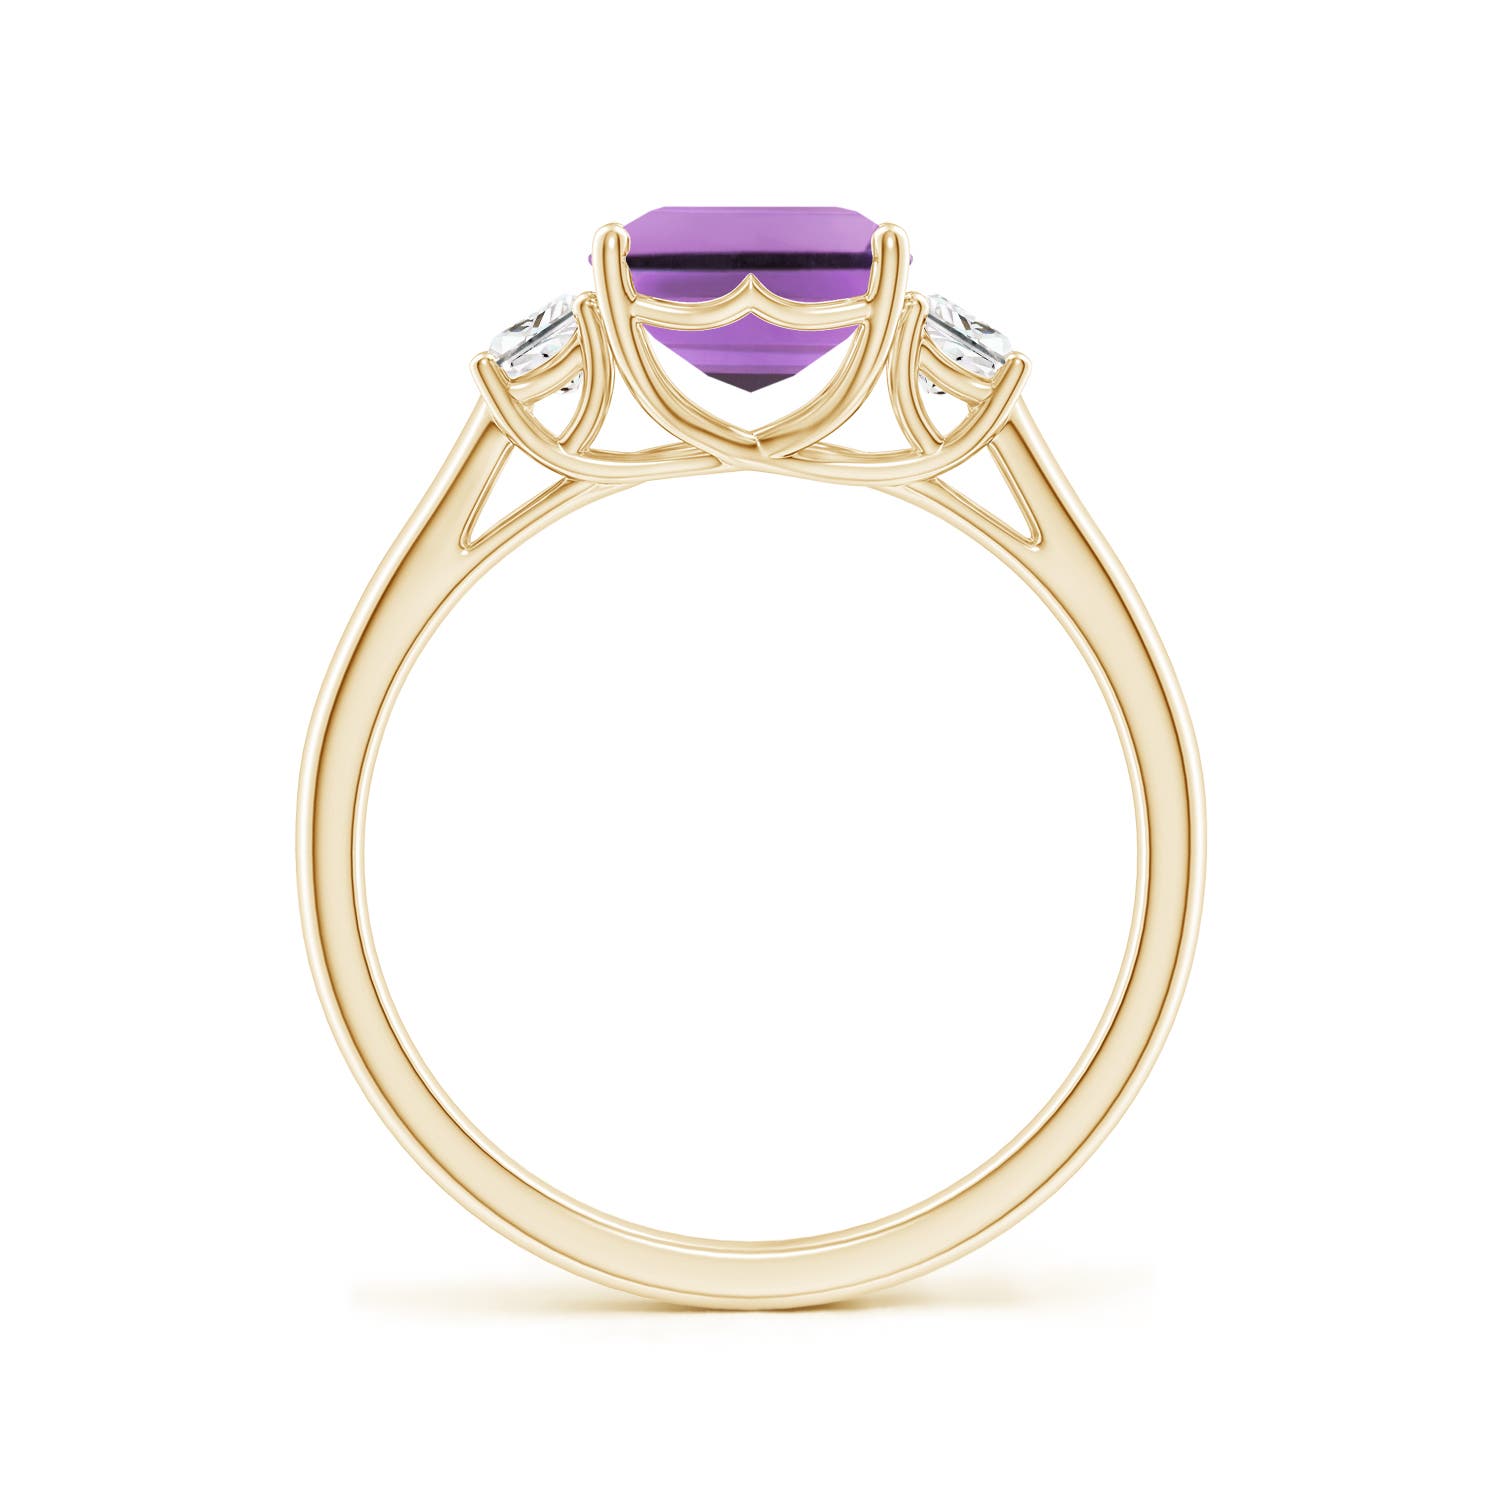 A- Amethyst / 2.52 CT / 14 KT Yellow Gold